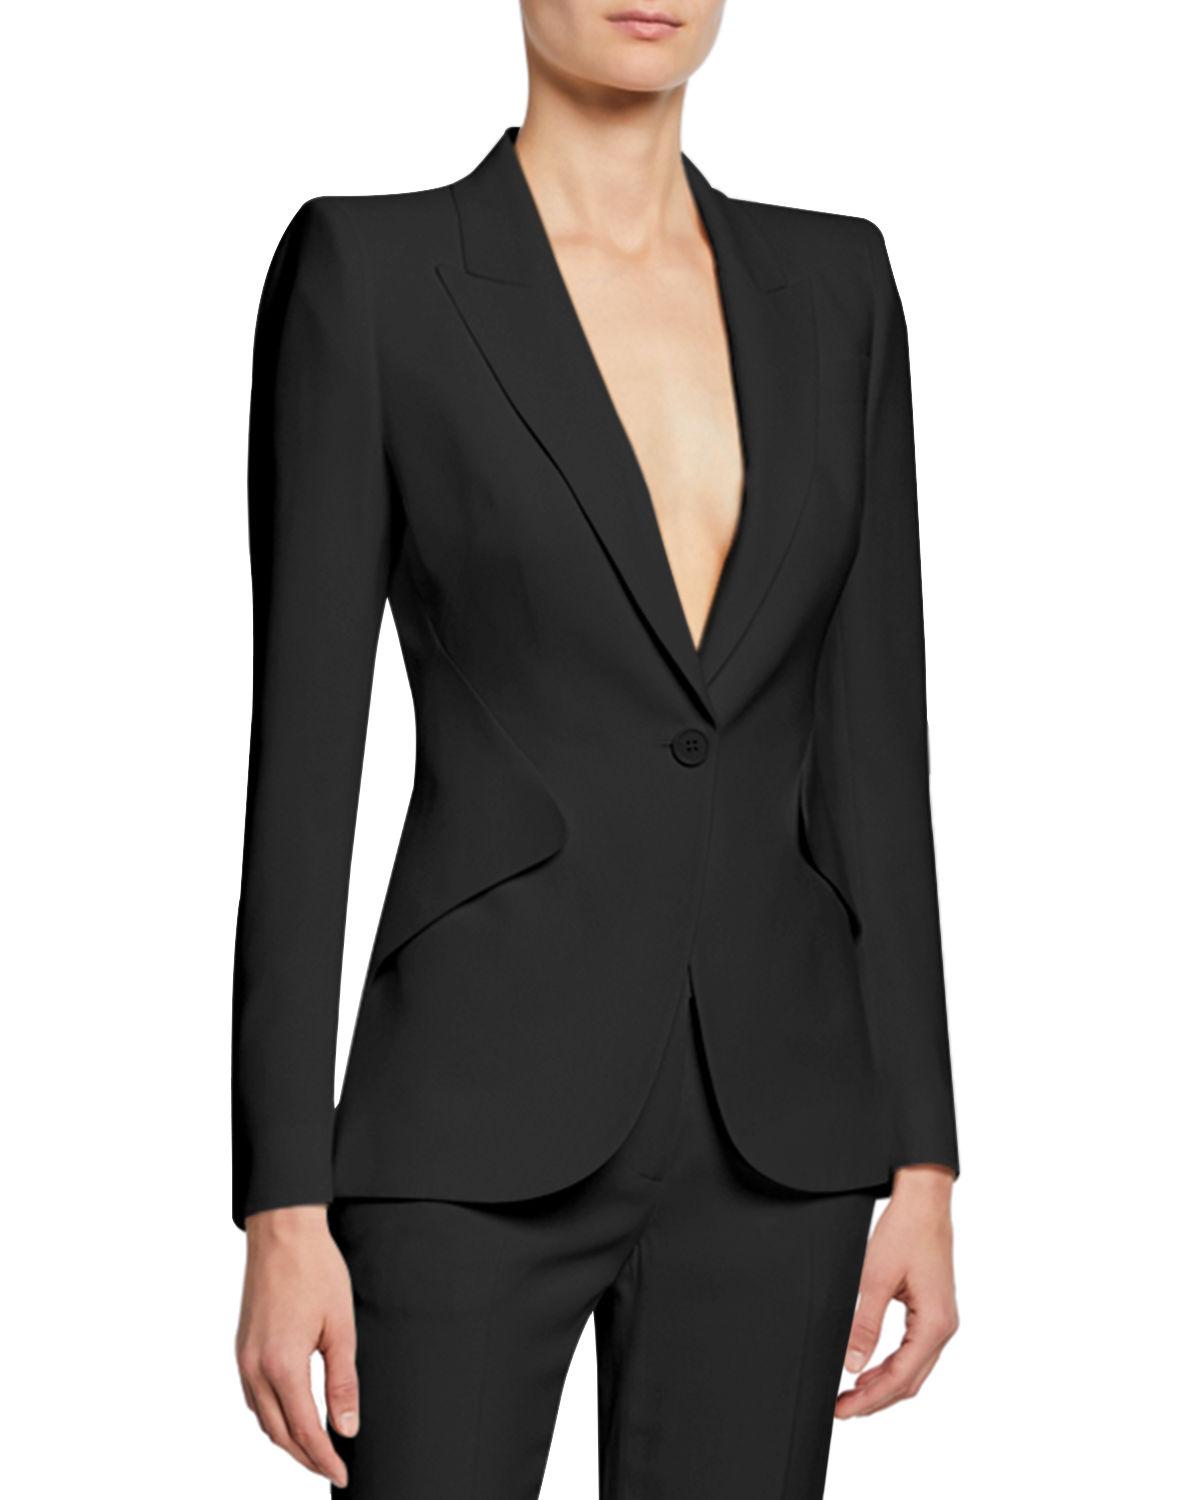 Lyst - Alexander McQueen Classic Double-breasted Suiting Blazer in Black